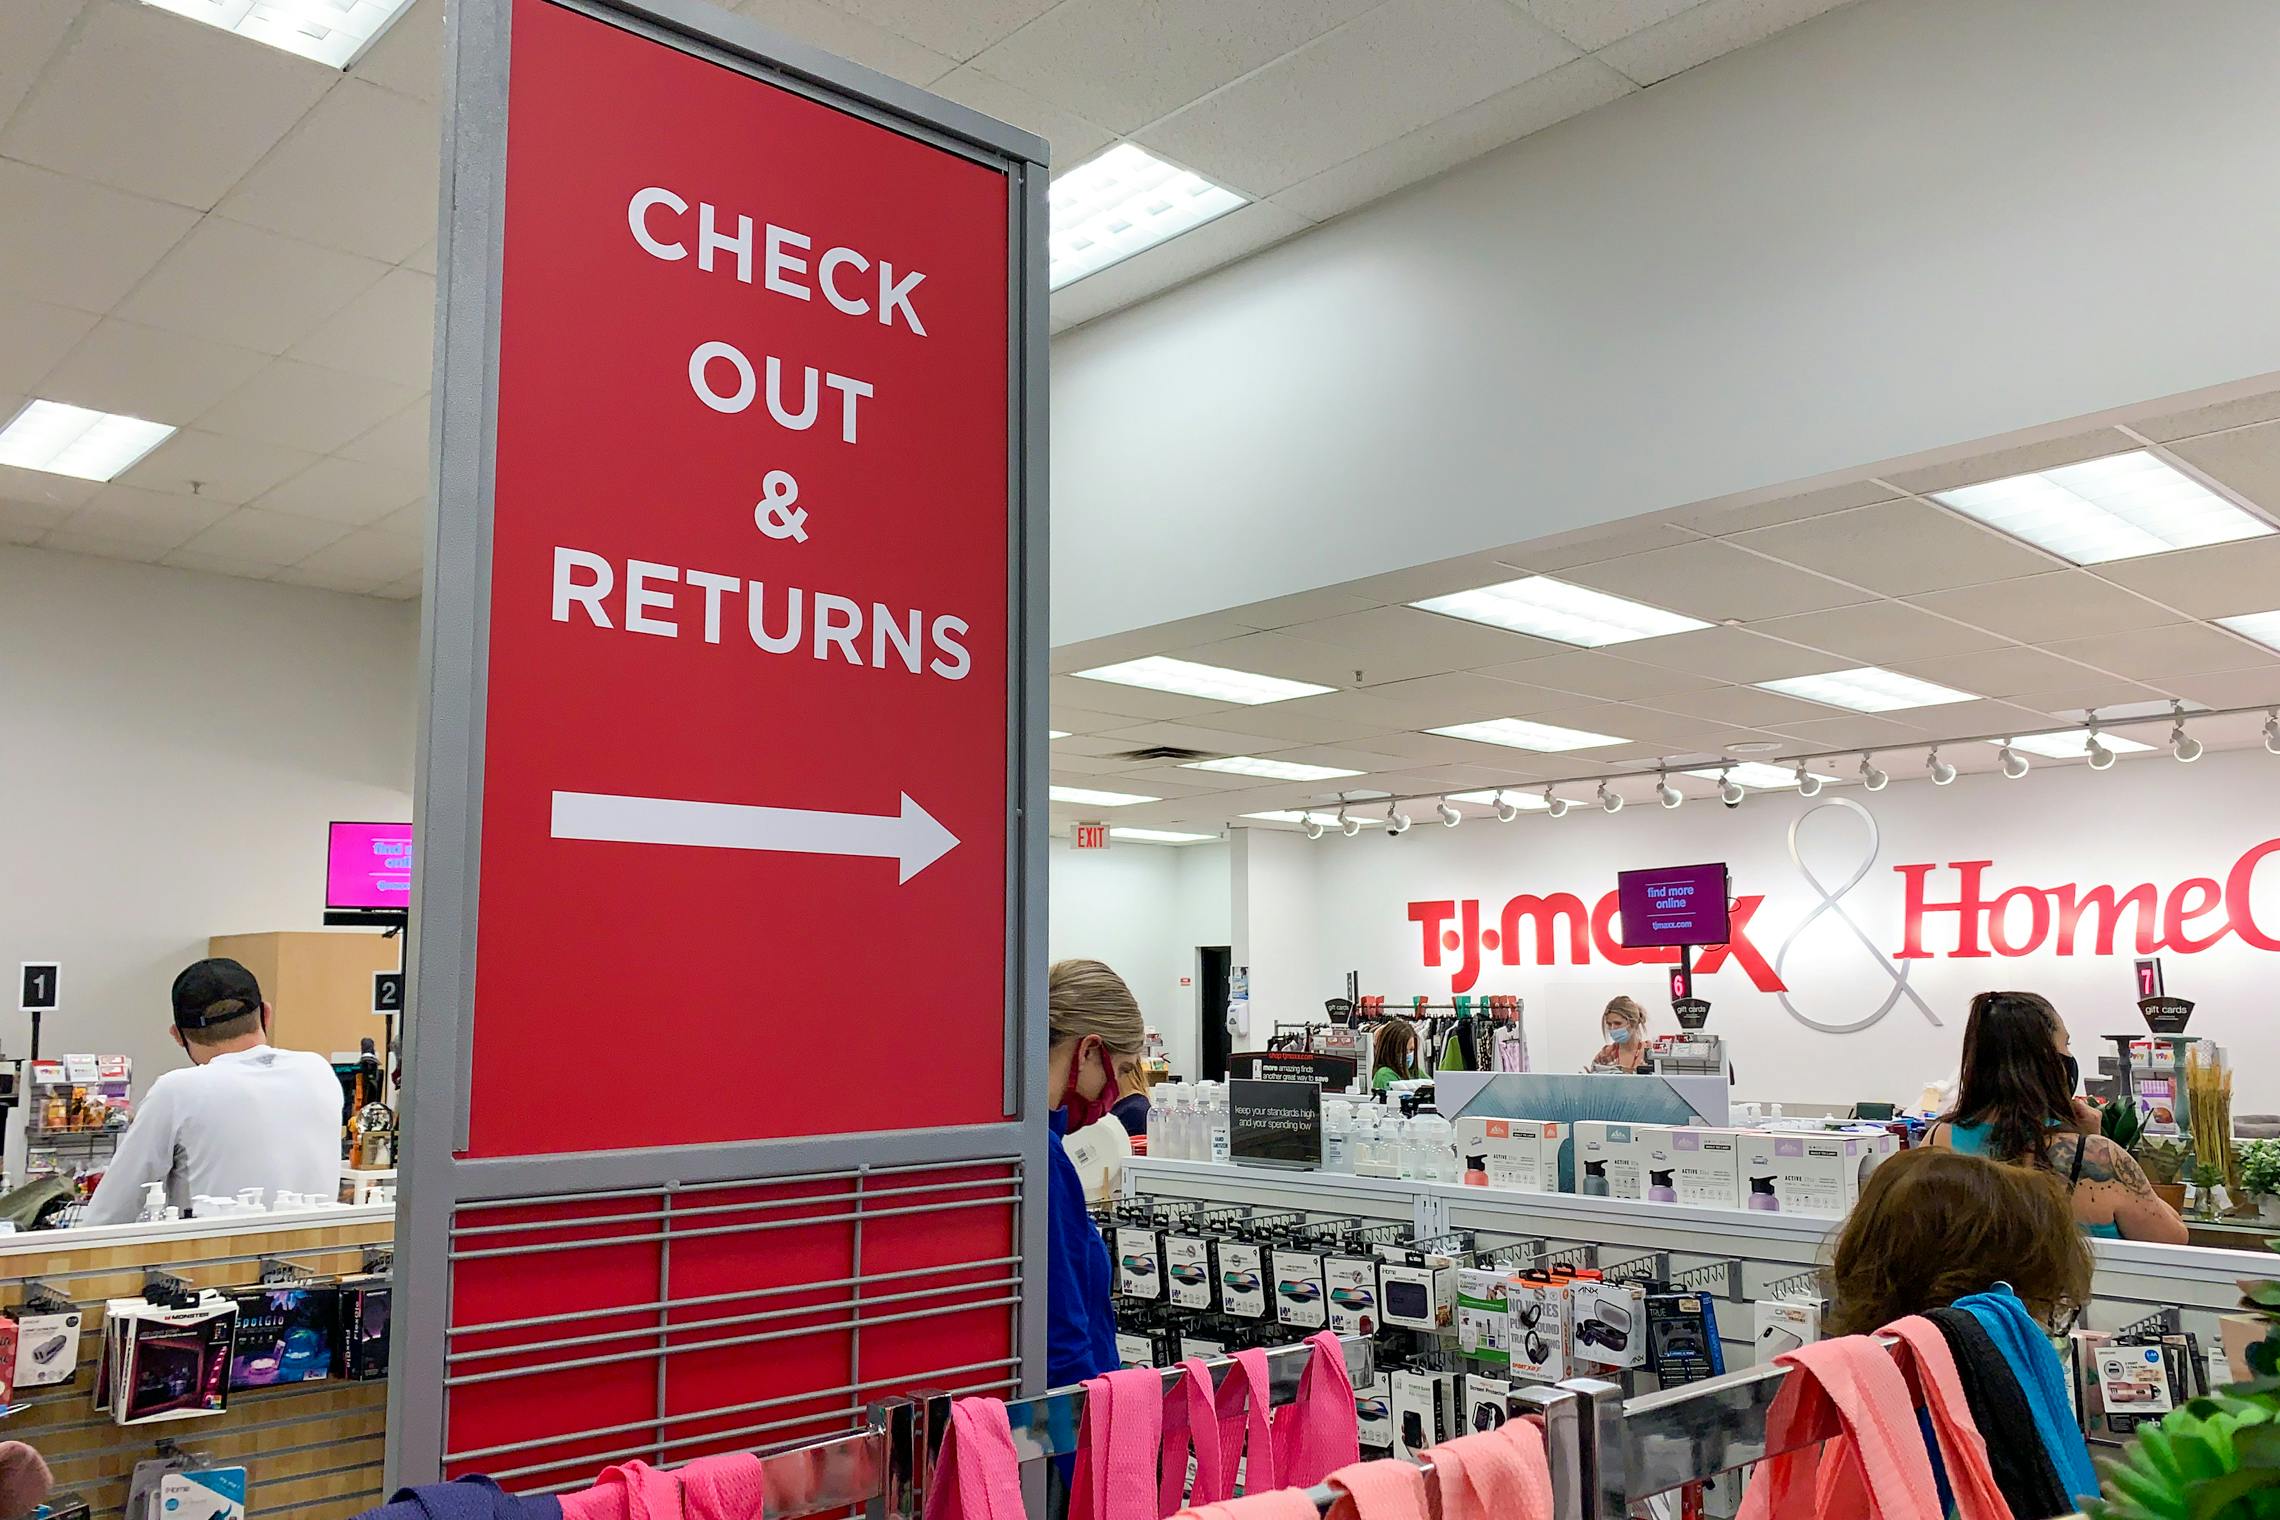 Check out and T.J.Maxx returns sign with people standing in line